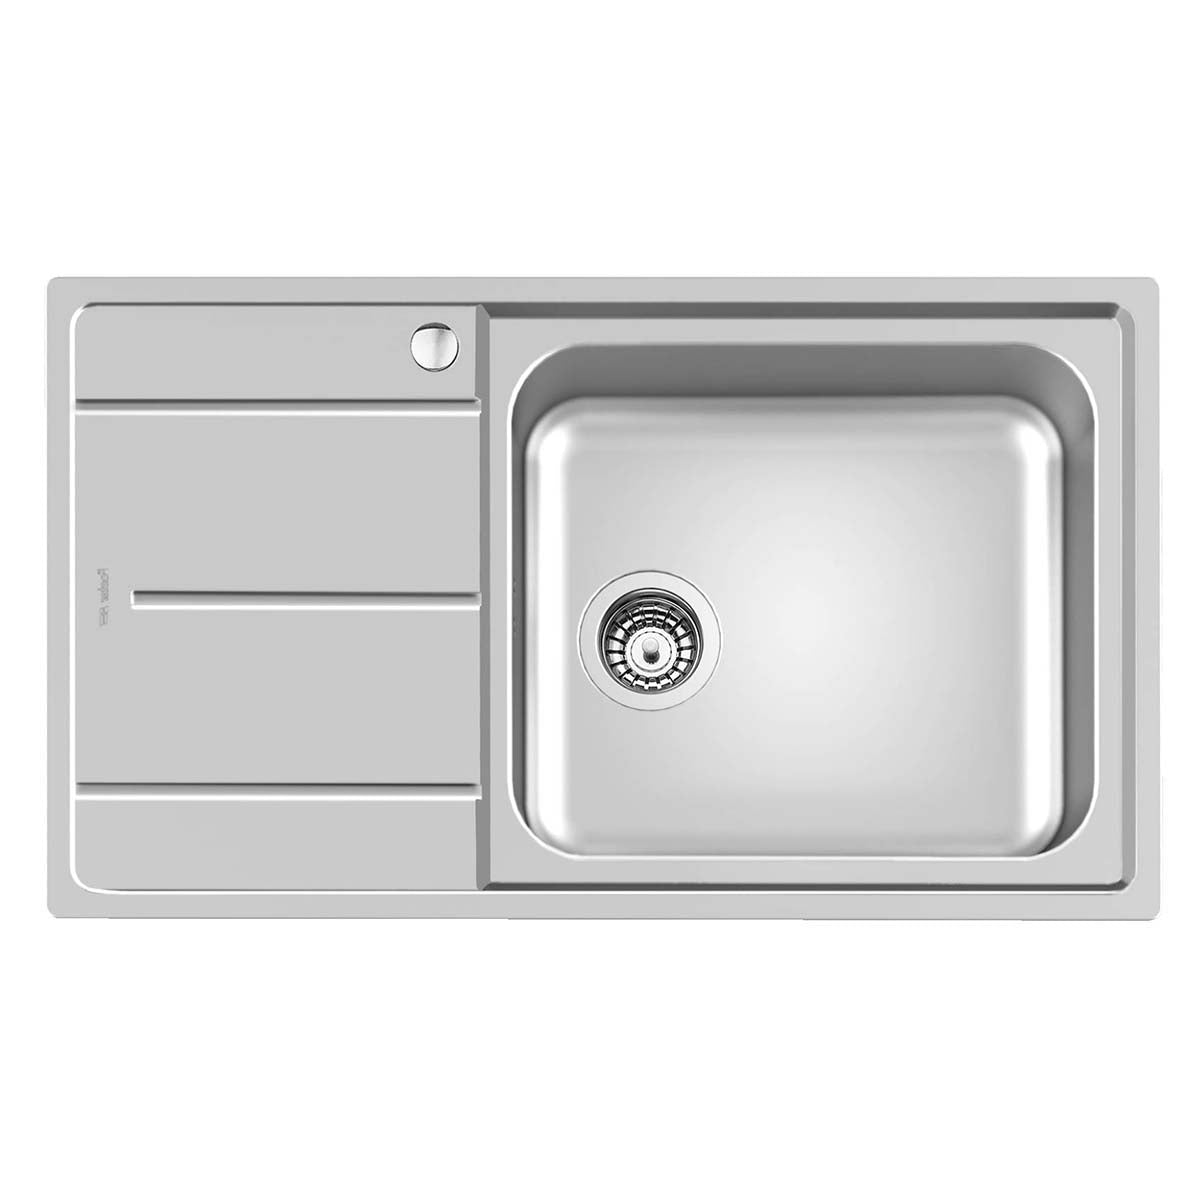 Foster Evo Kitchen Sink with Draining Board Right Handed 860x500mm Brushed Stainless Steel